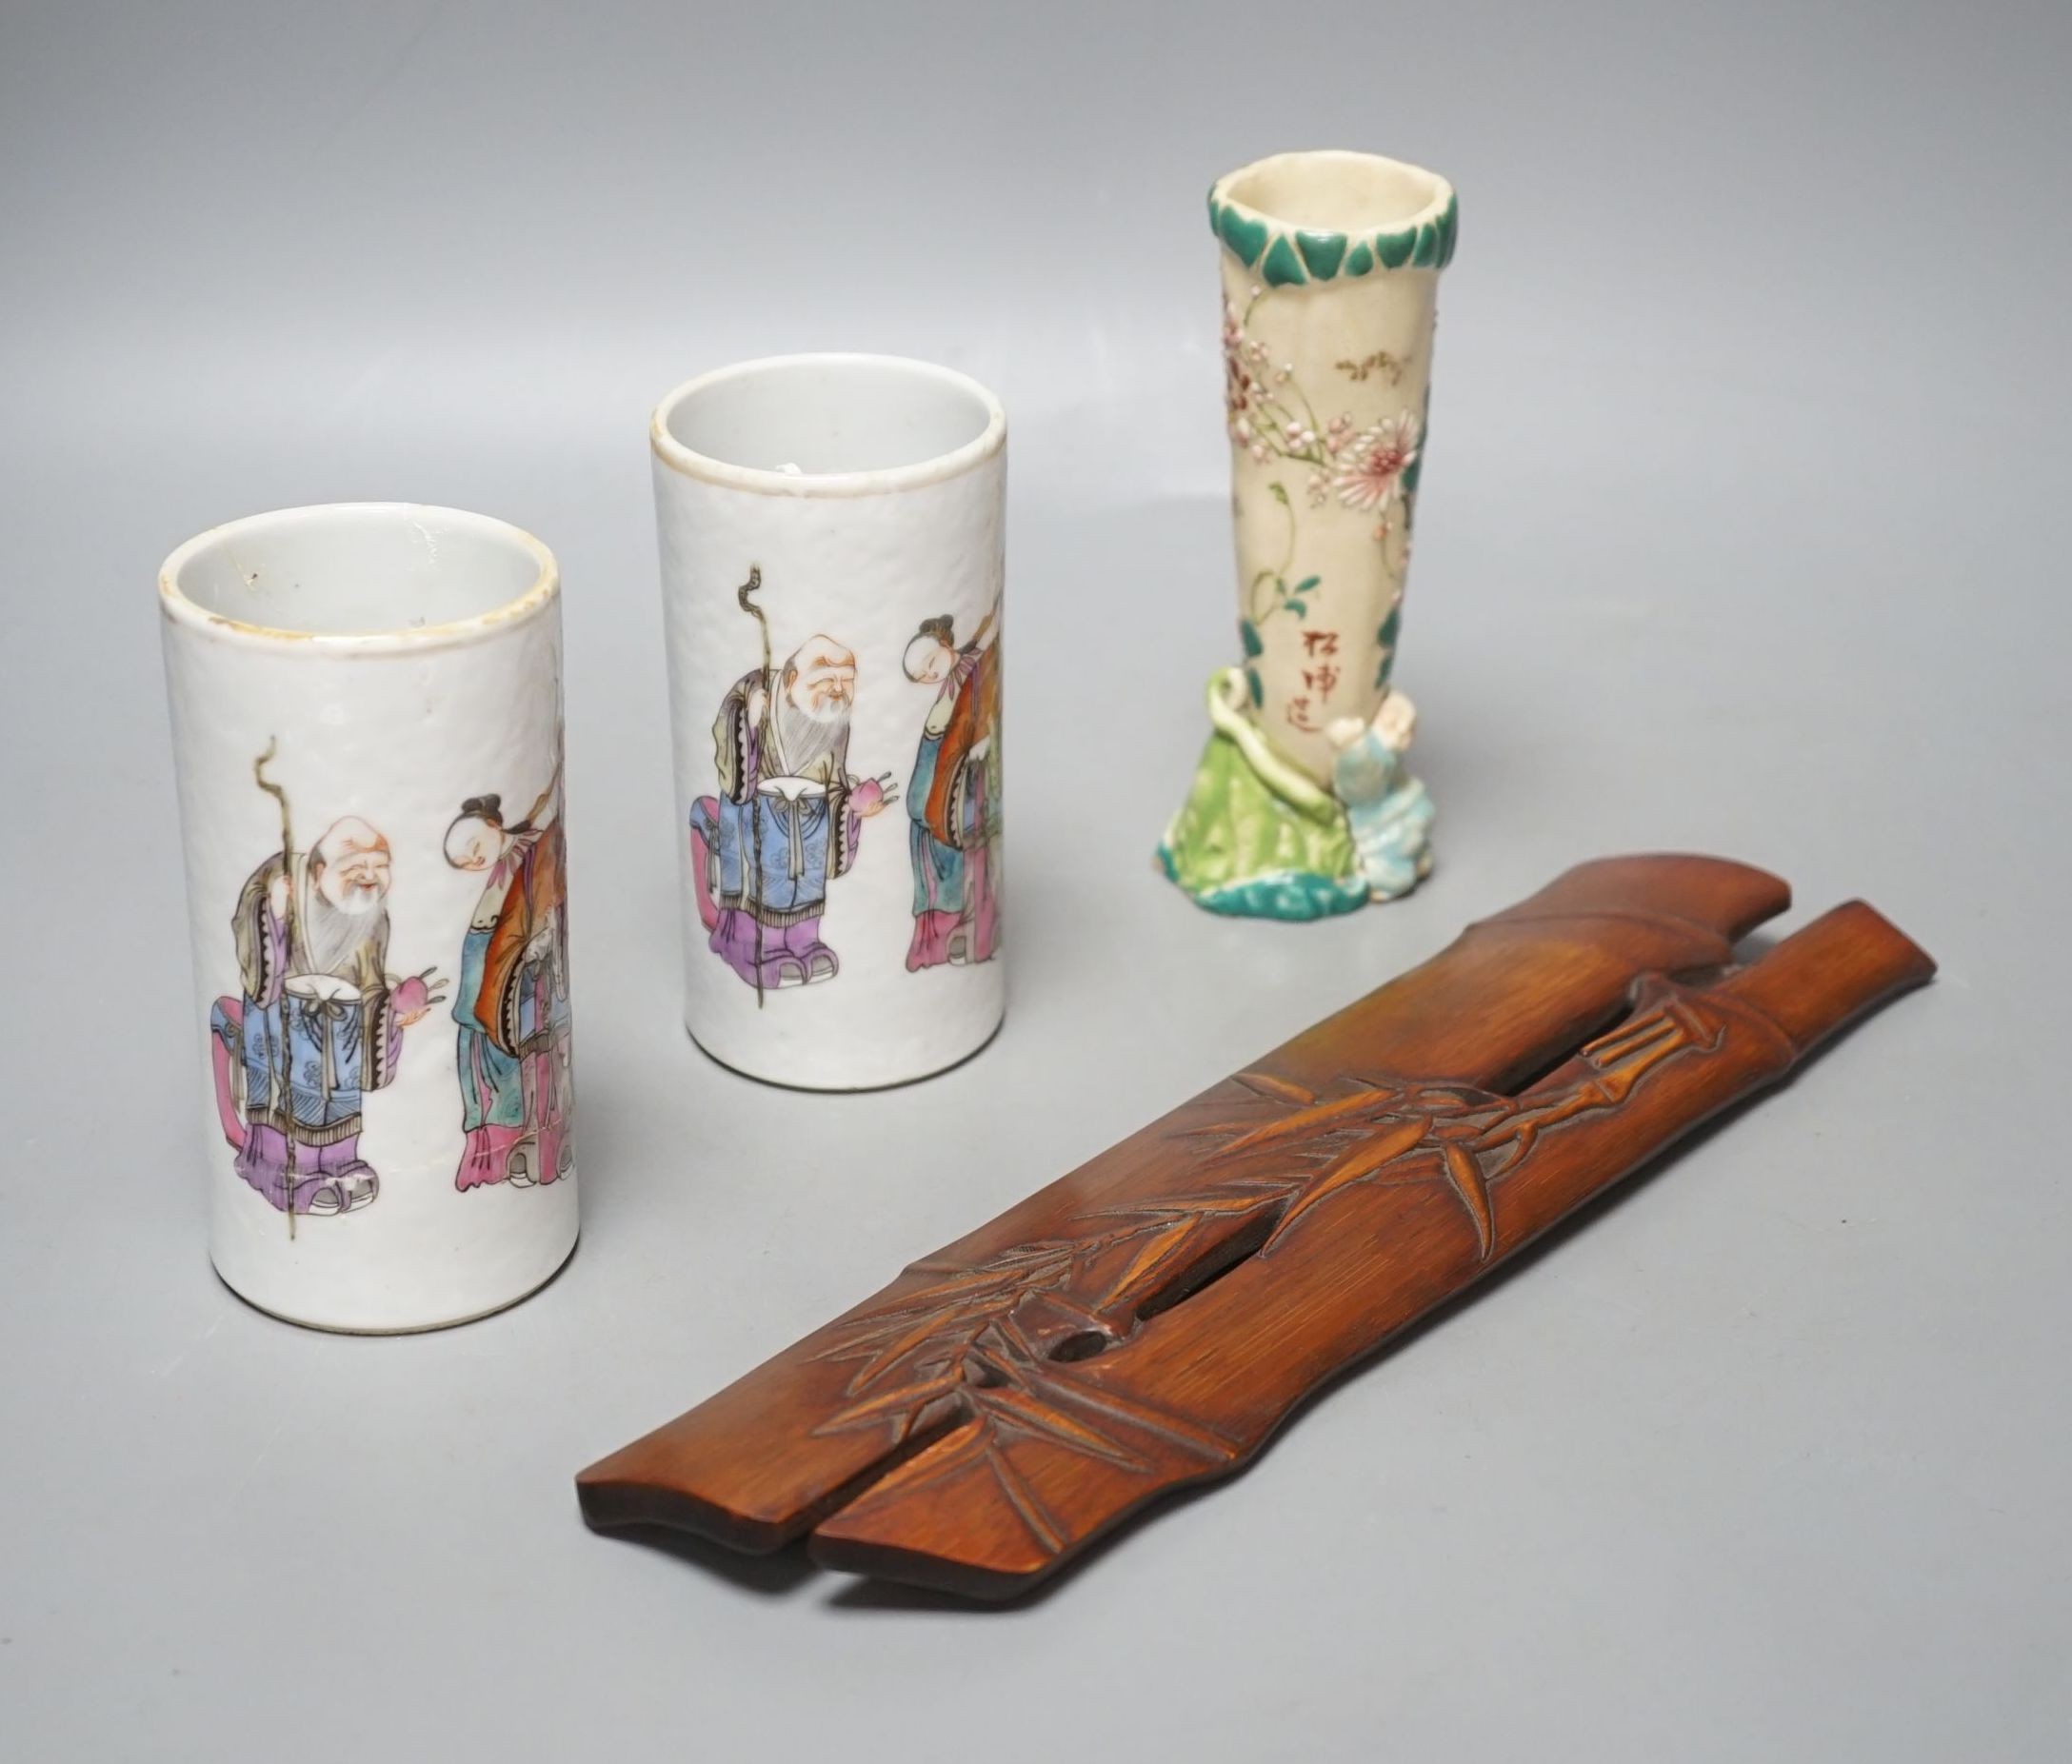 A pair of Chinese famille rose spill vases, Satsuma spill vase and bamboo wrist-rest, Wrist-rest 29 cms long.